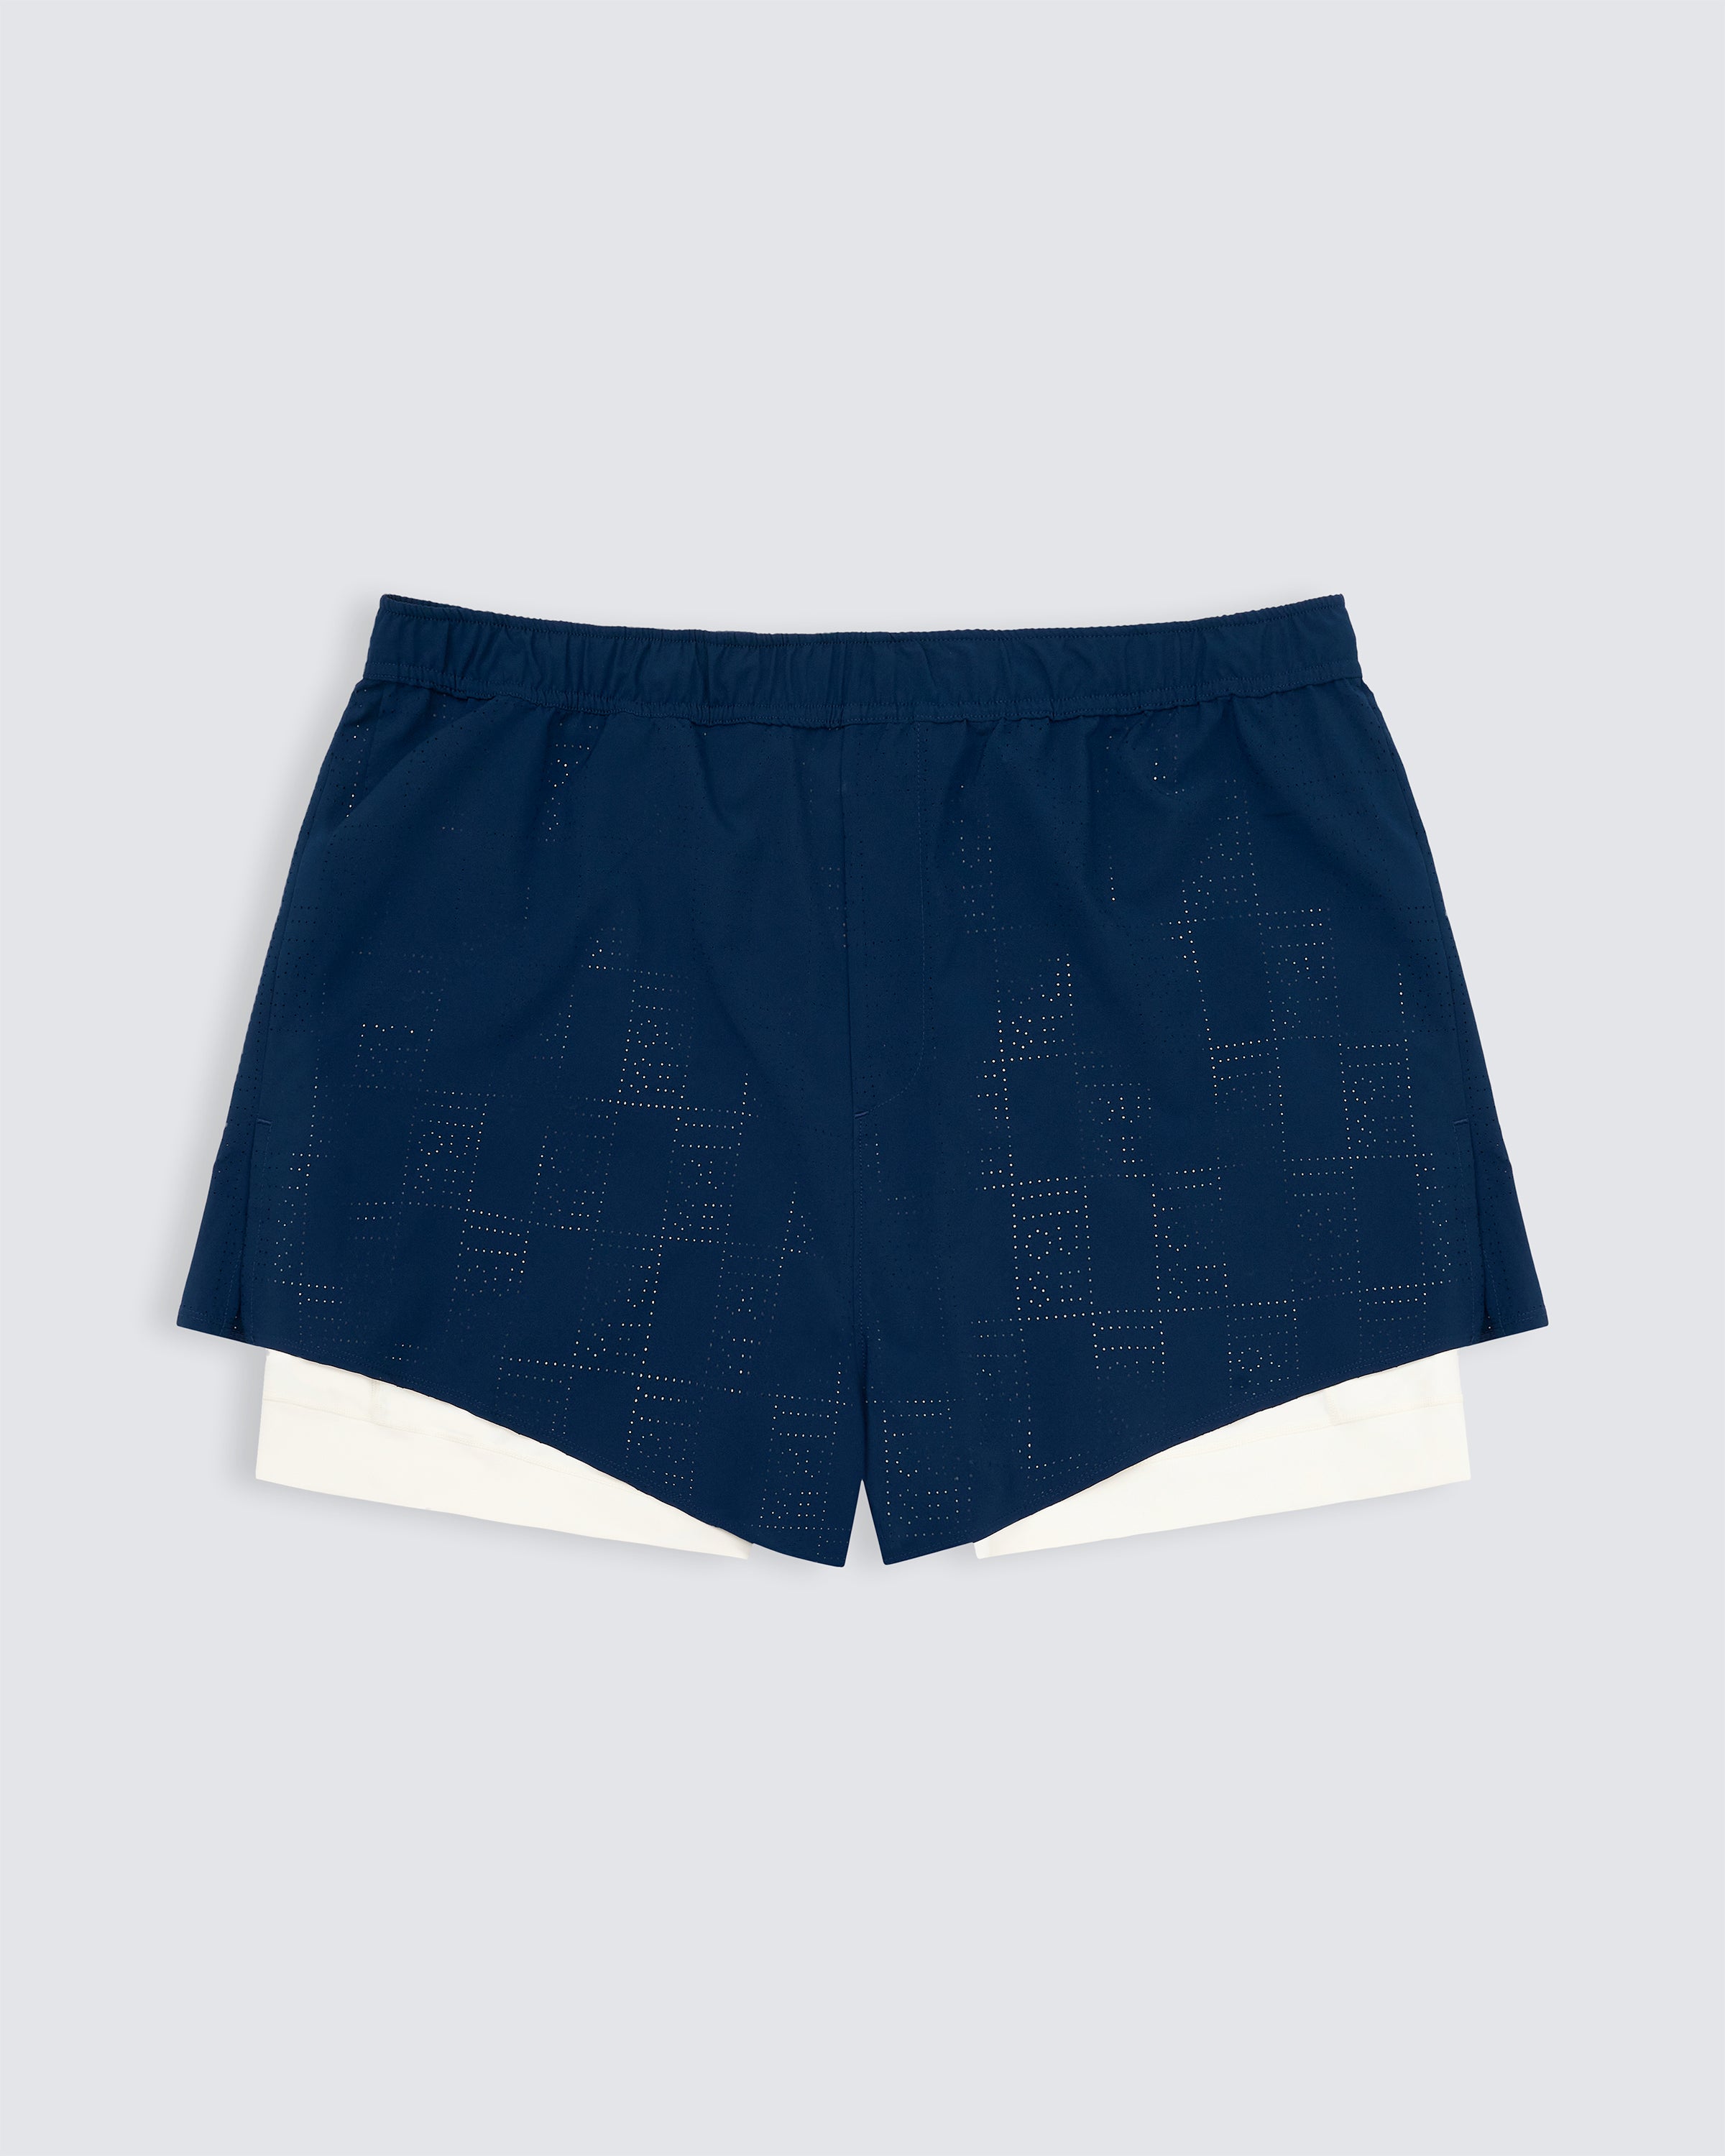 Mens lined sports short in navy and white